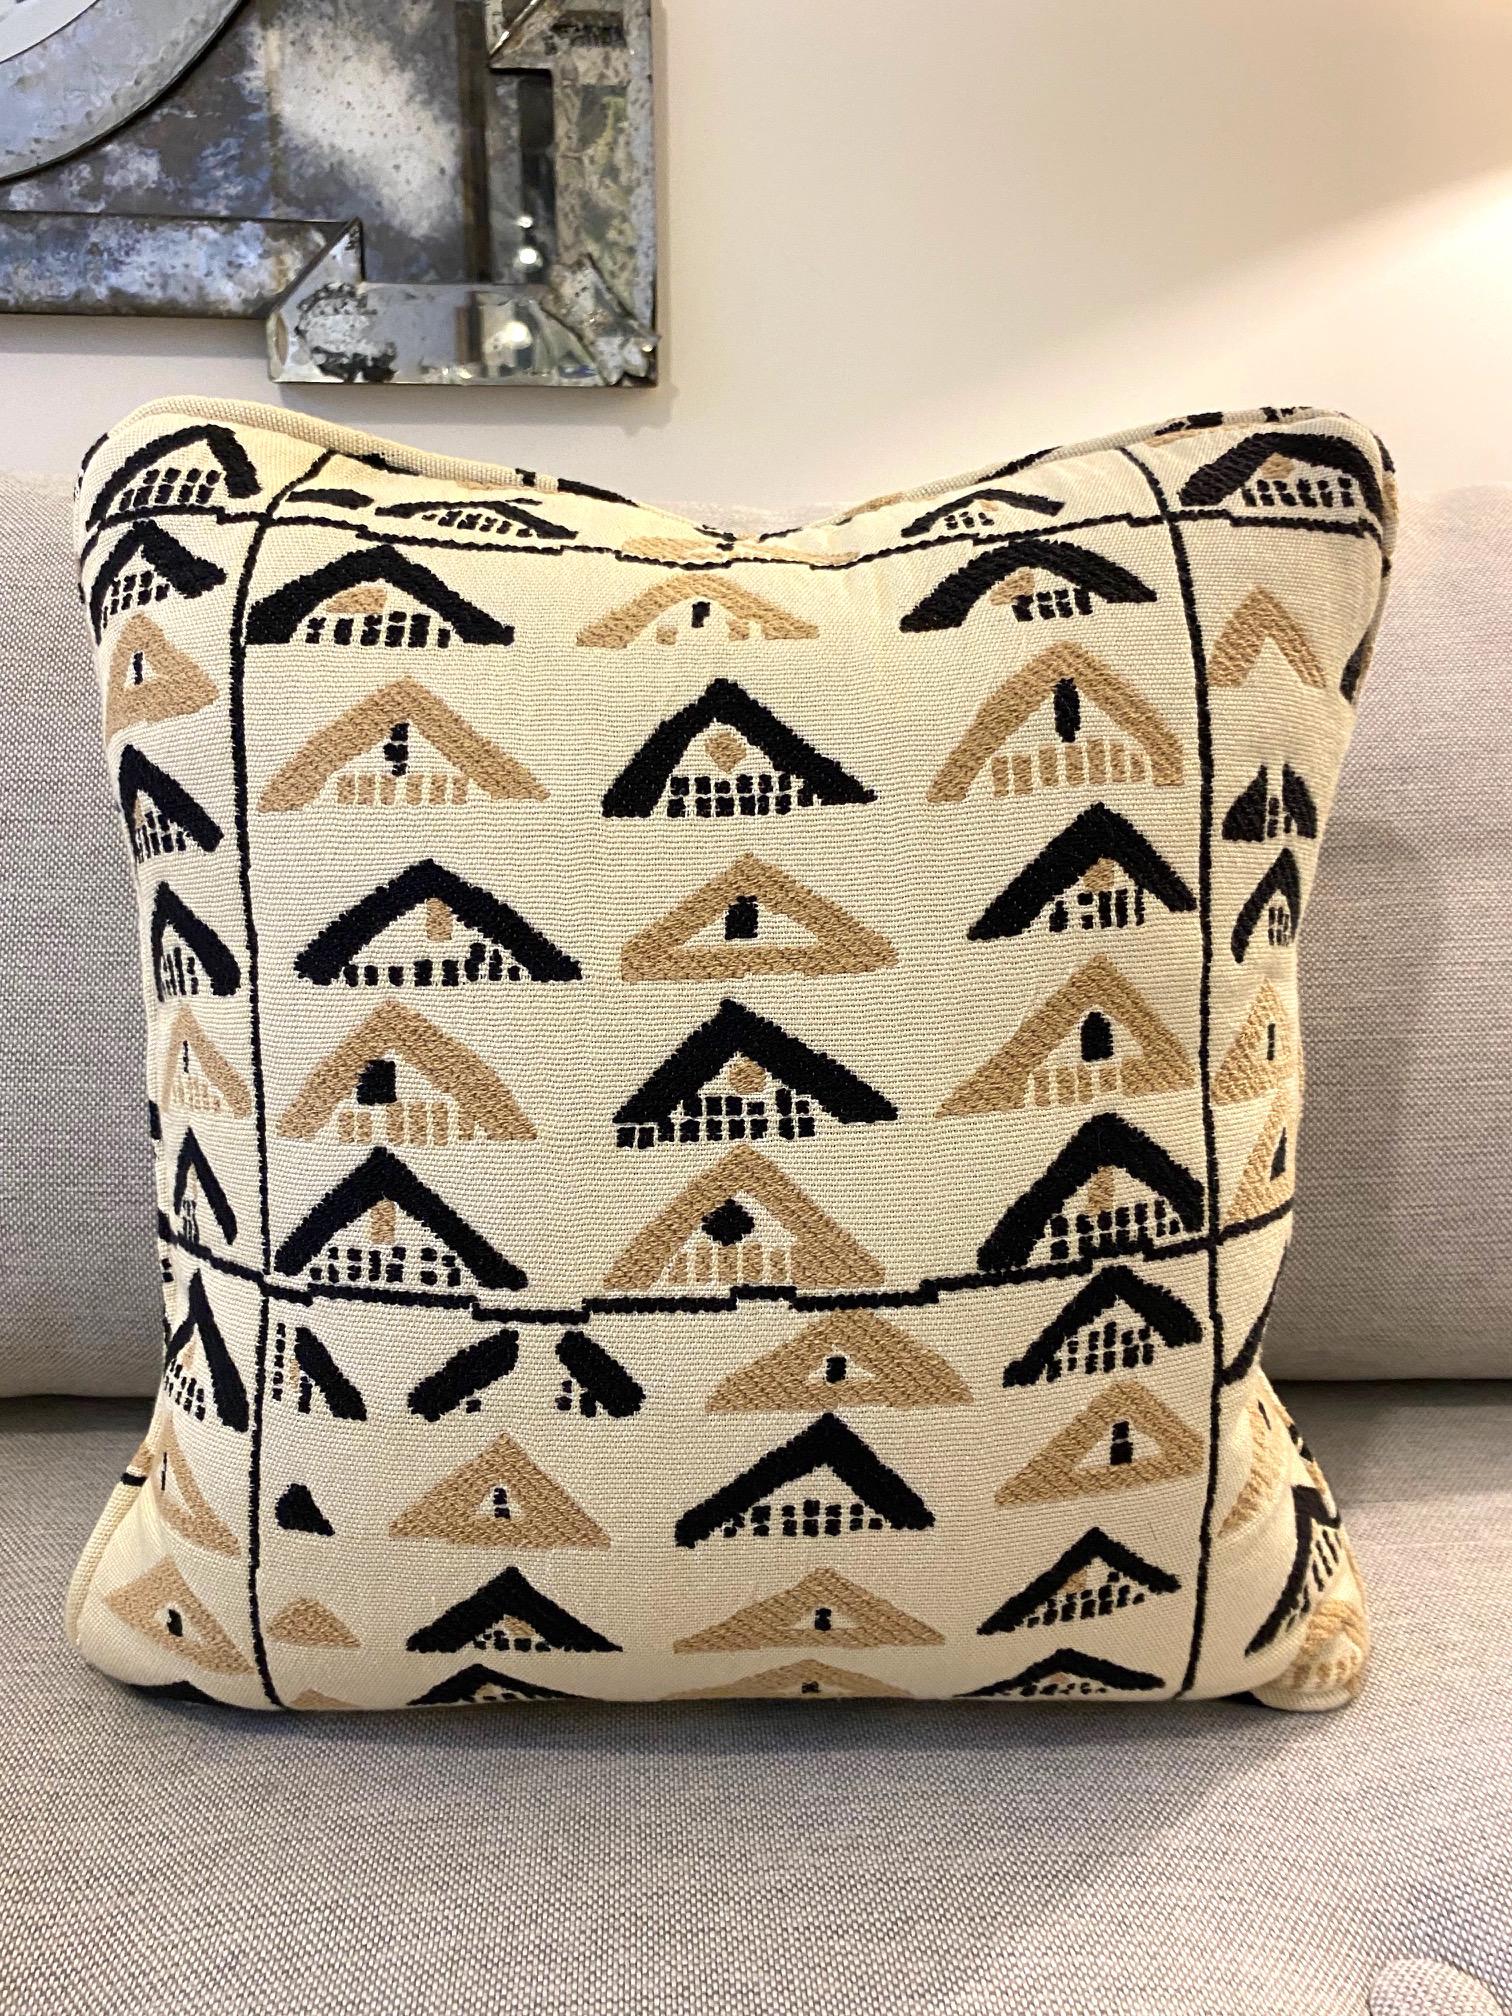 Decorative pillow upholstered in Pierre Frey's 